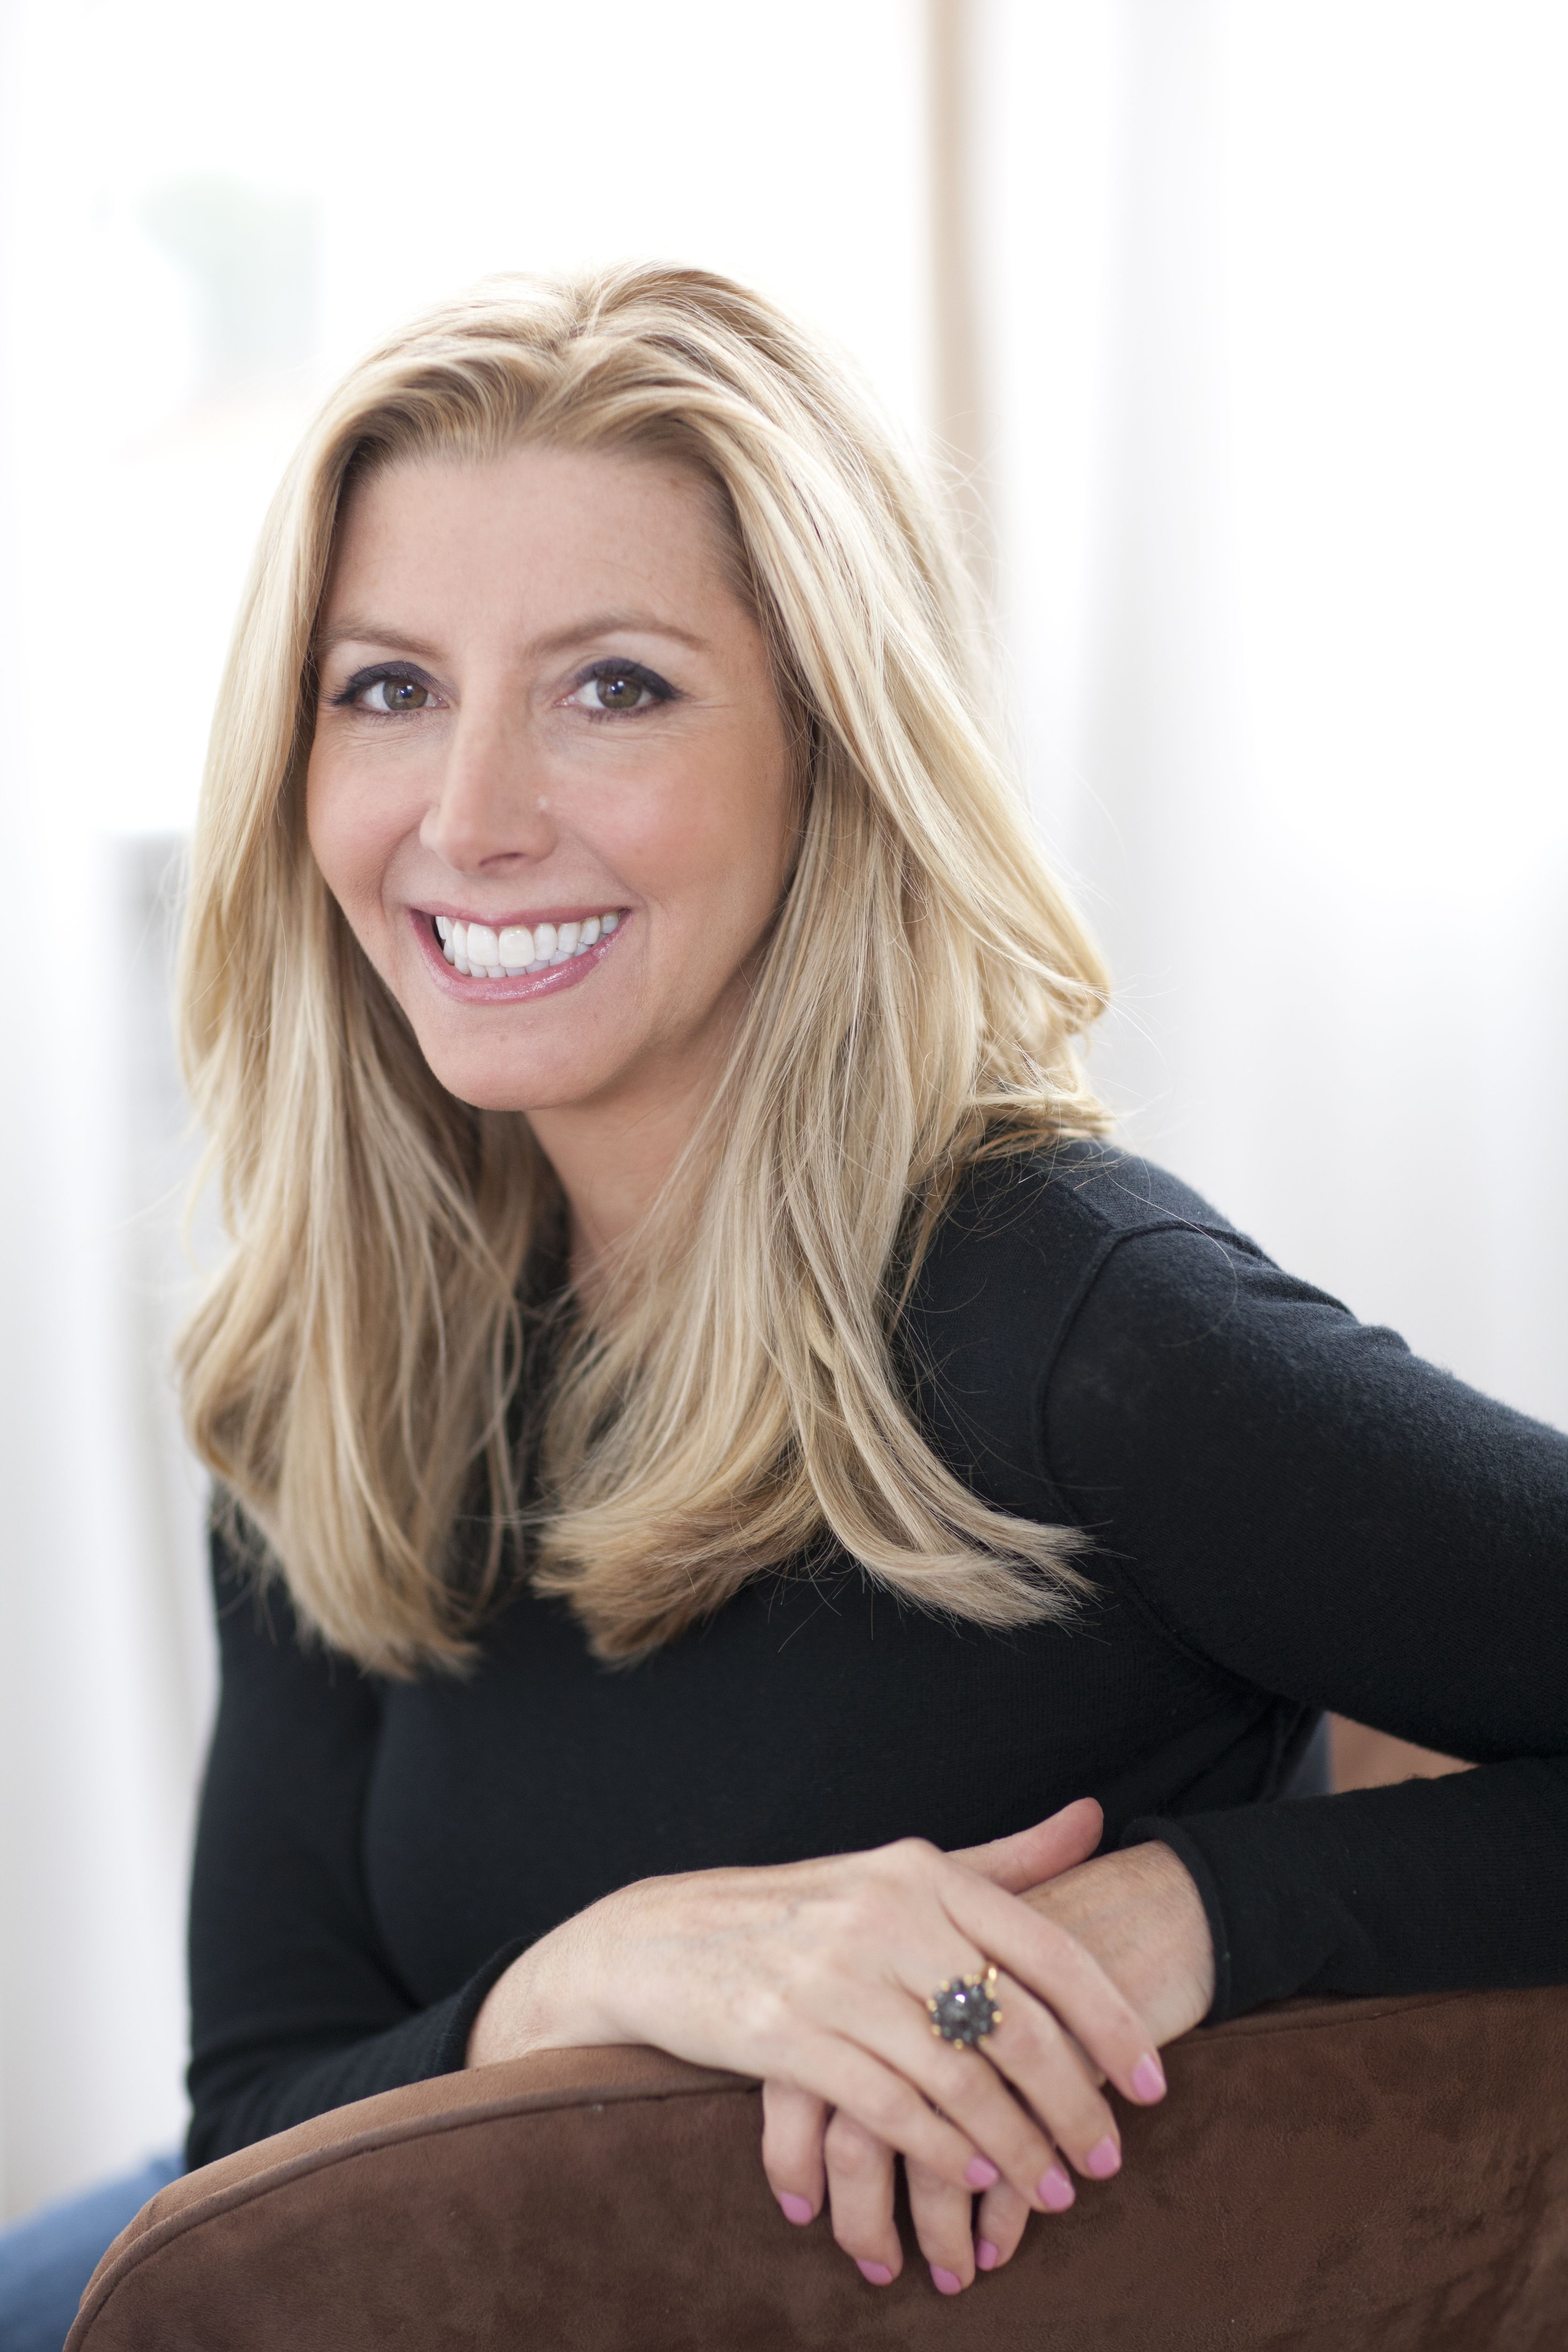 Spanx Founder Sara Blakely on family, mentoring and keeping the competition  'behind' her - Tampa Bay Business Journal